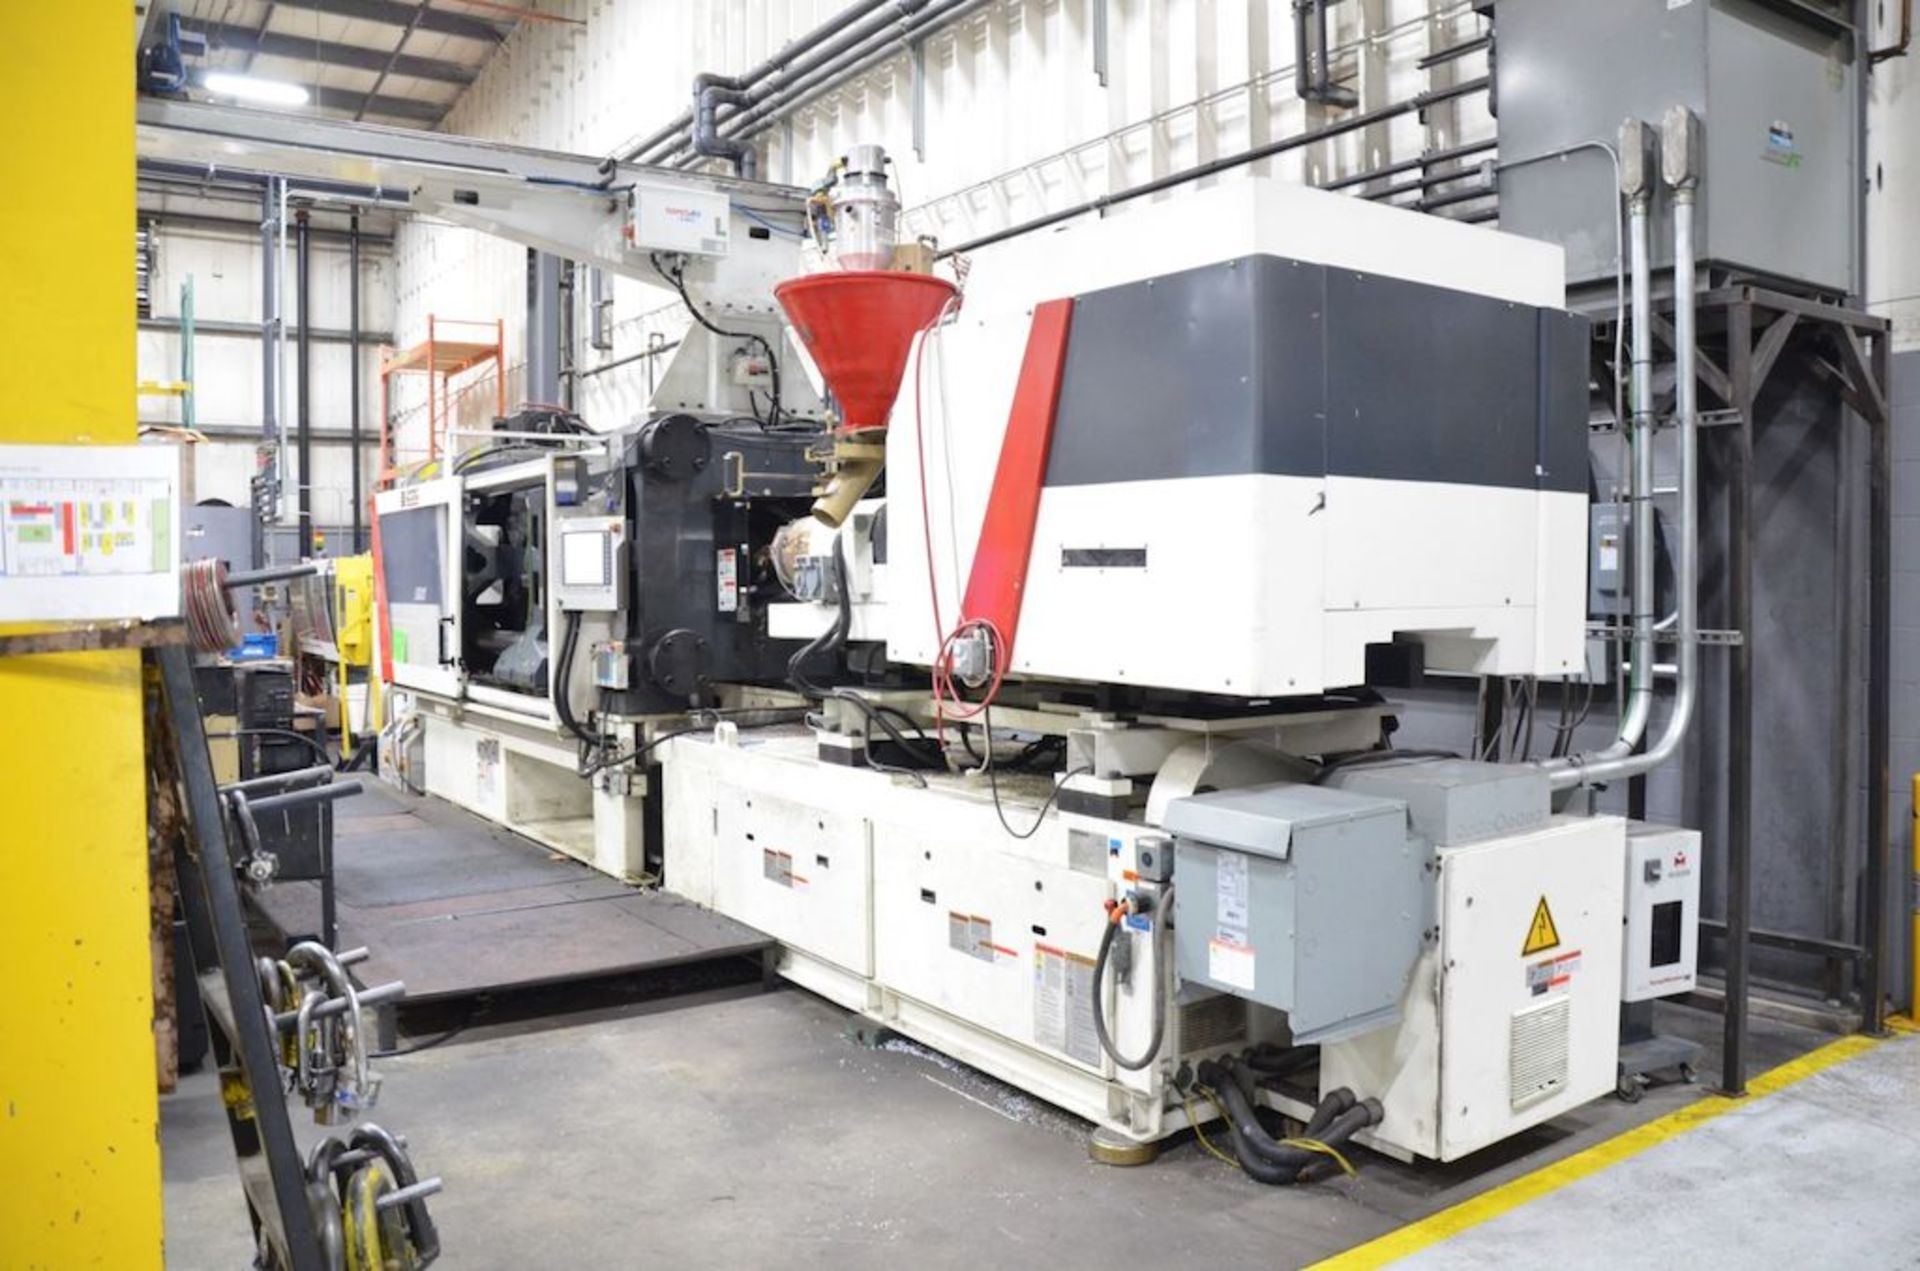 Milacron 505 Ton All Electric Injection Molding Press, New in 2014 - Image 4 of 10